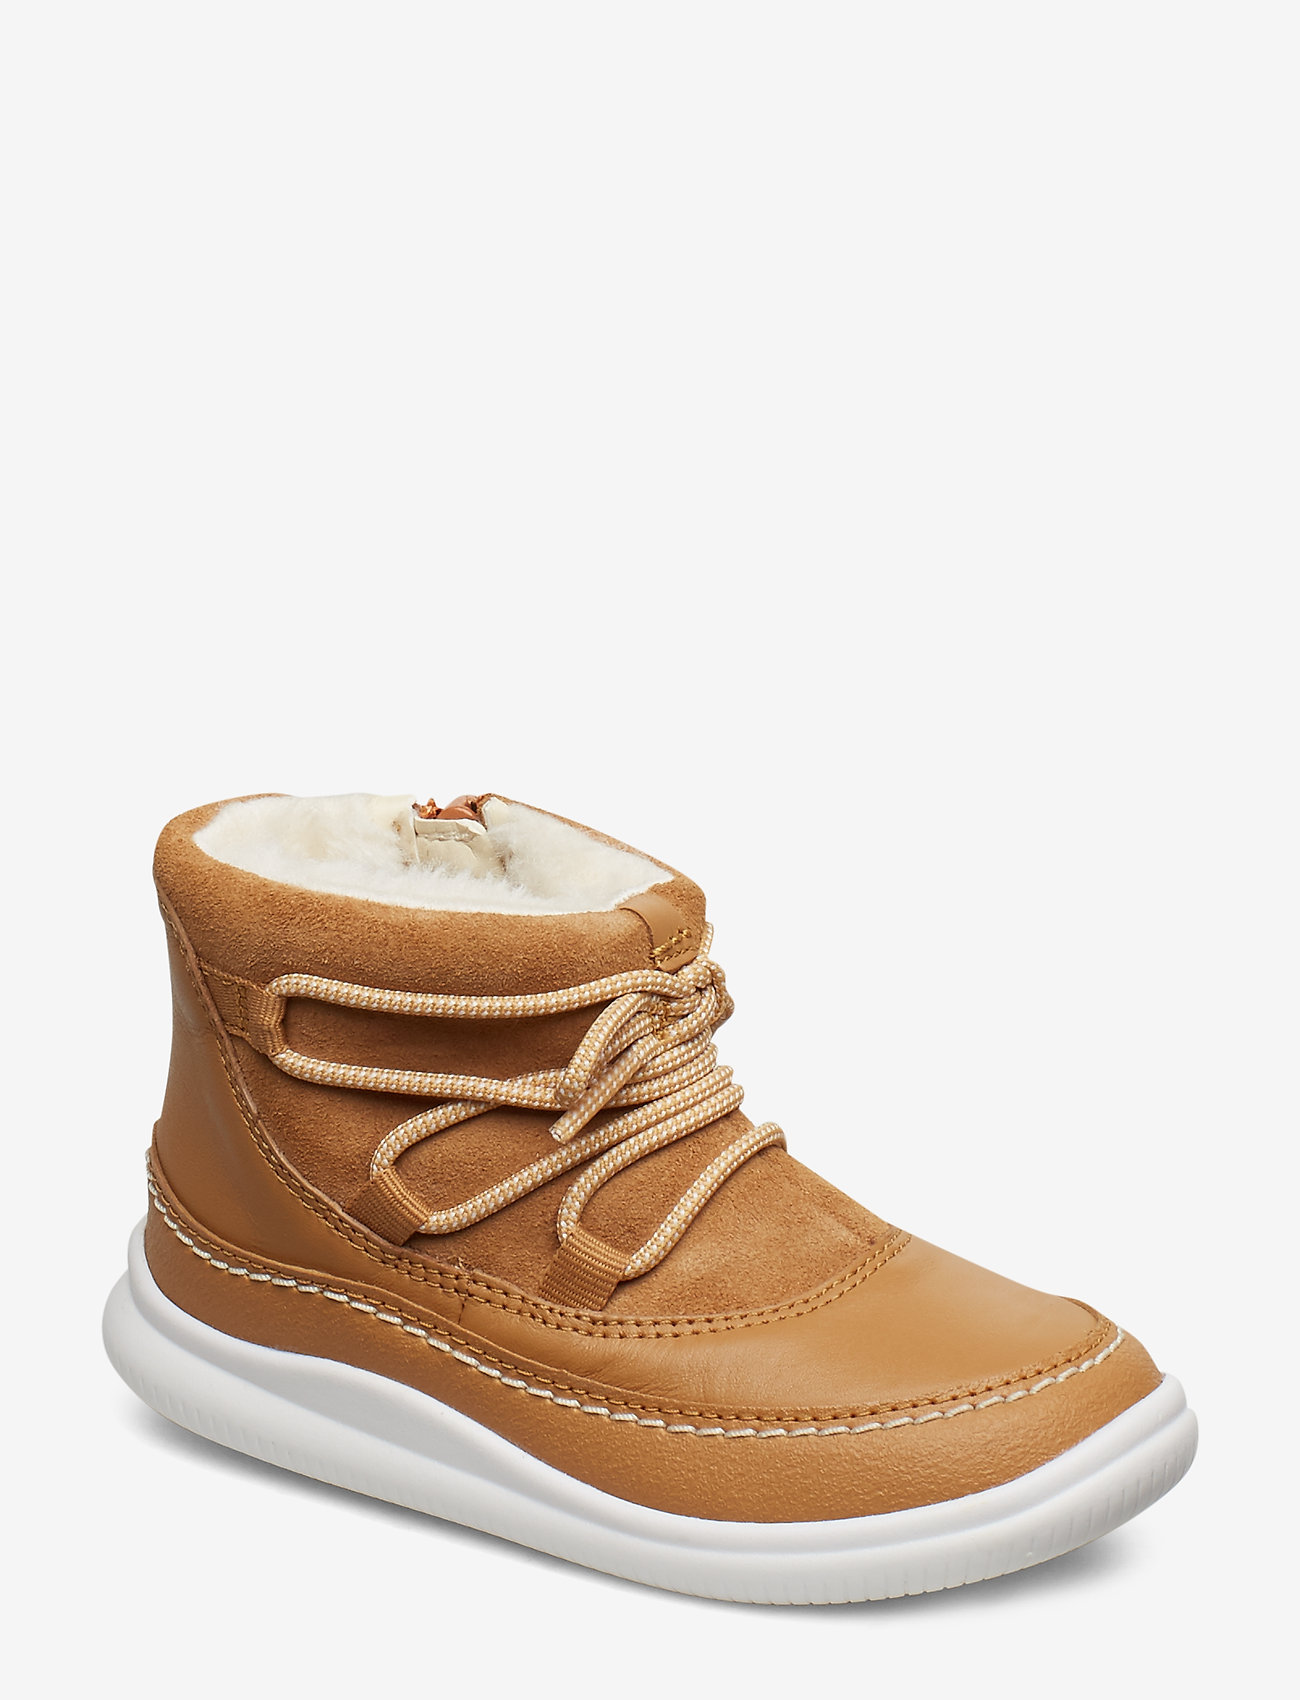 clarks winter boots toddler